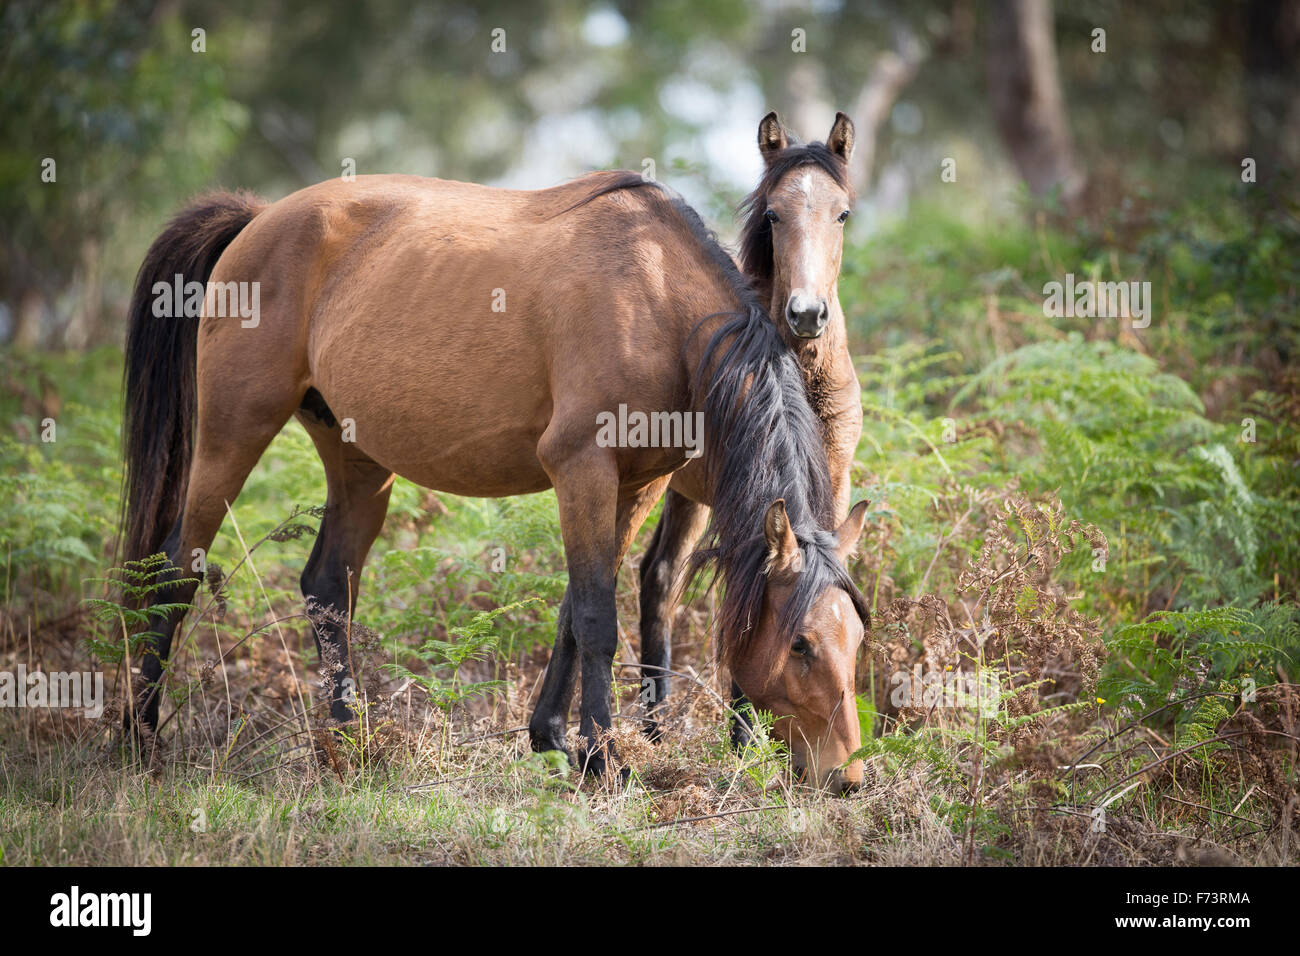 Brumby. Mare with foal, grazing. Australia Stock Photo